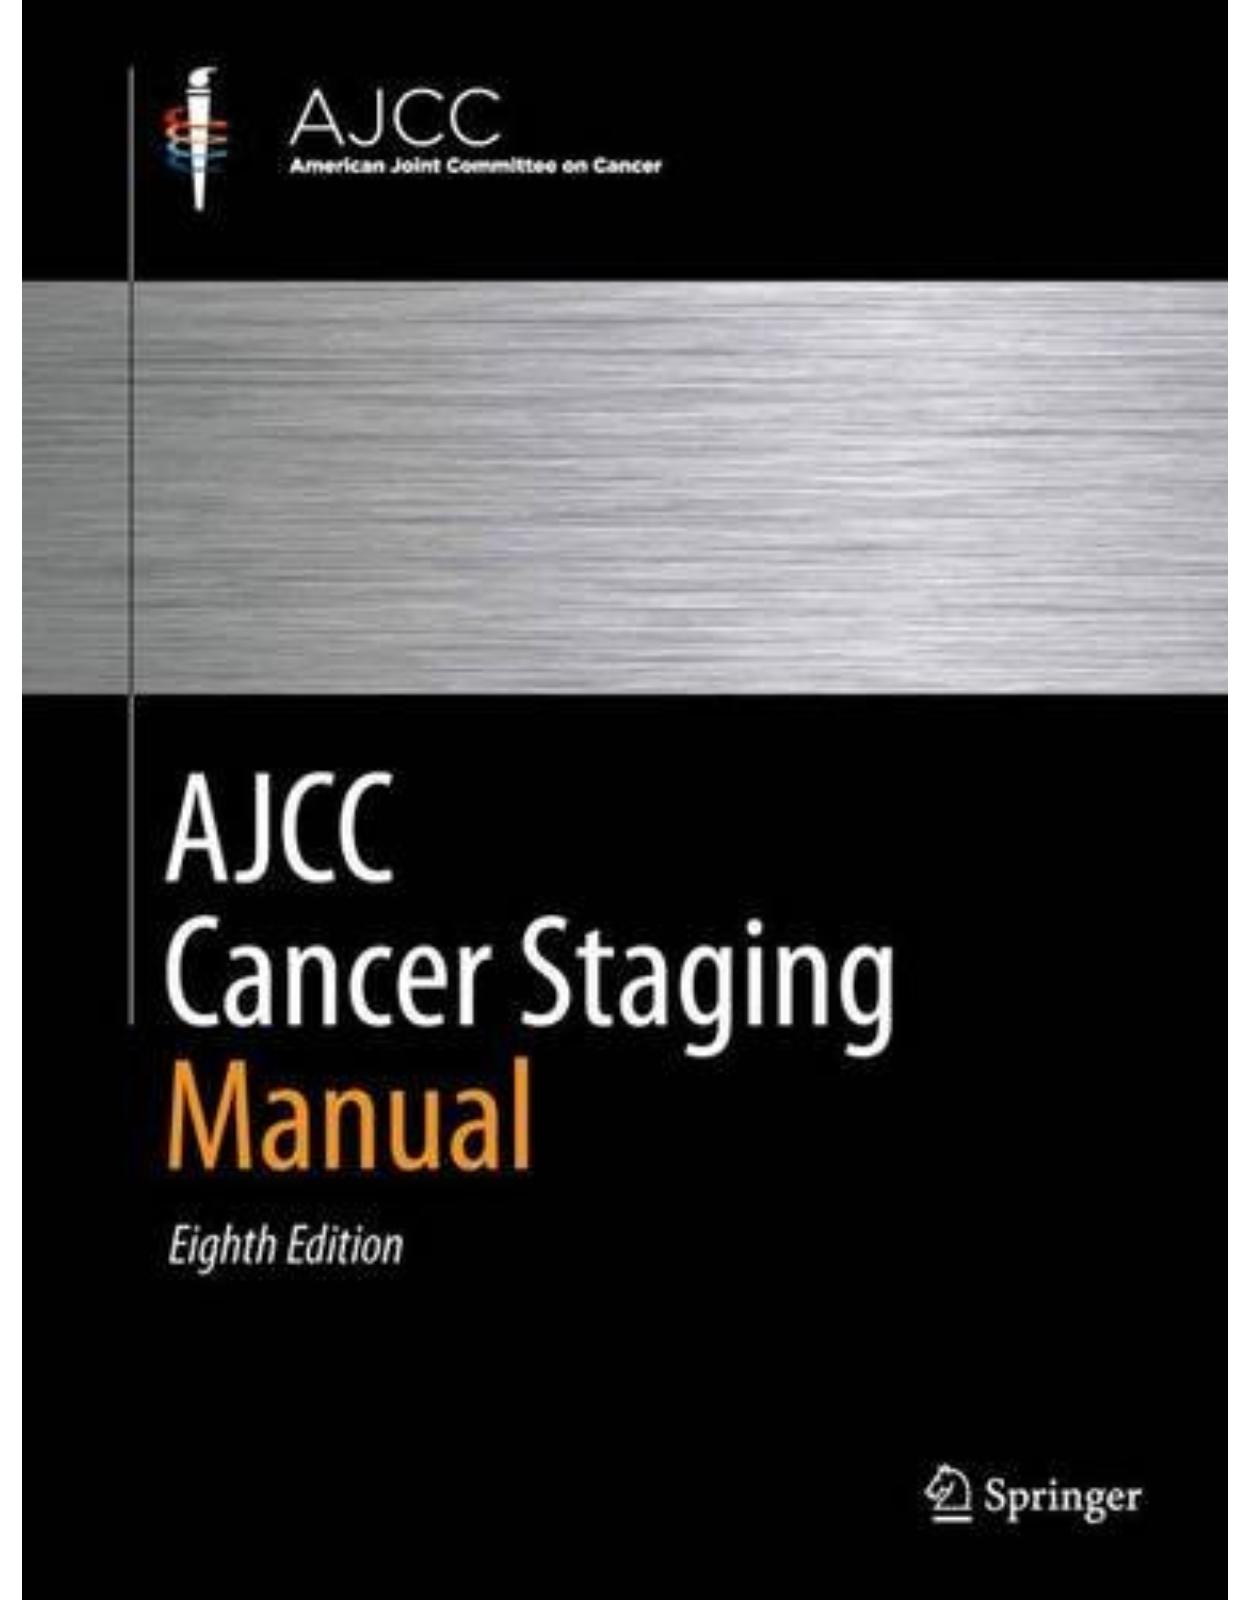 AJCC Cancer Staging Manual 